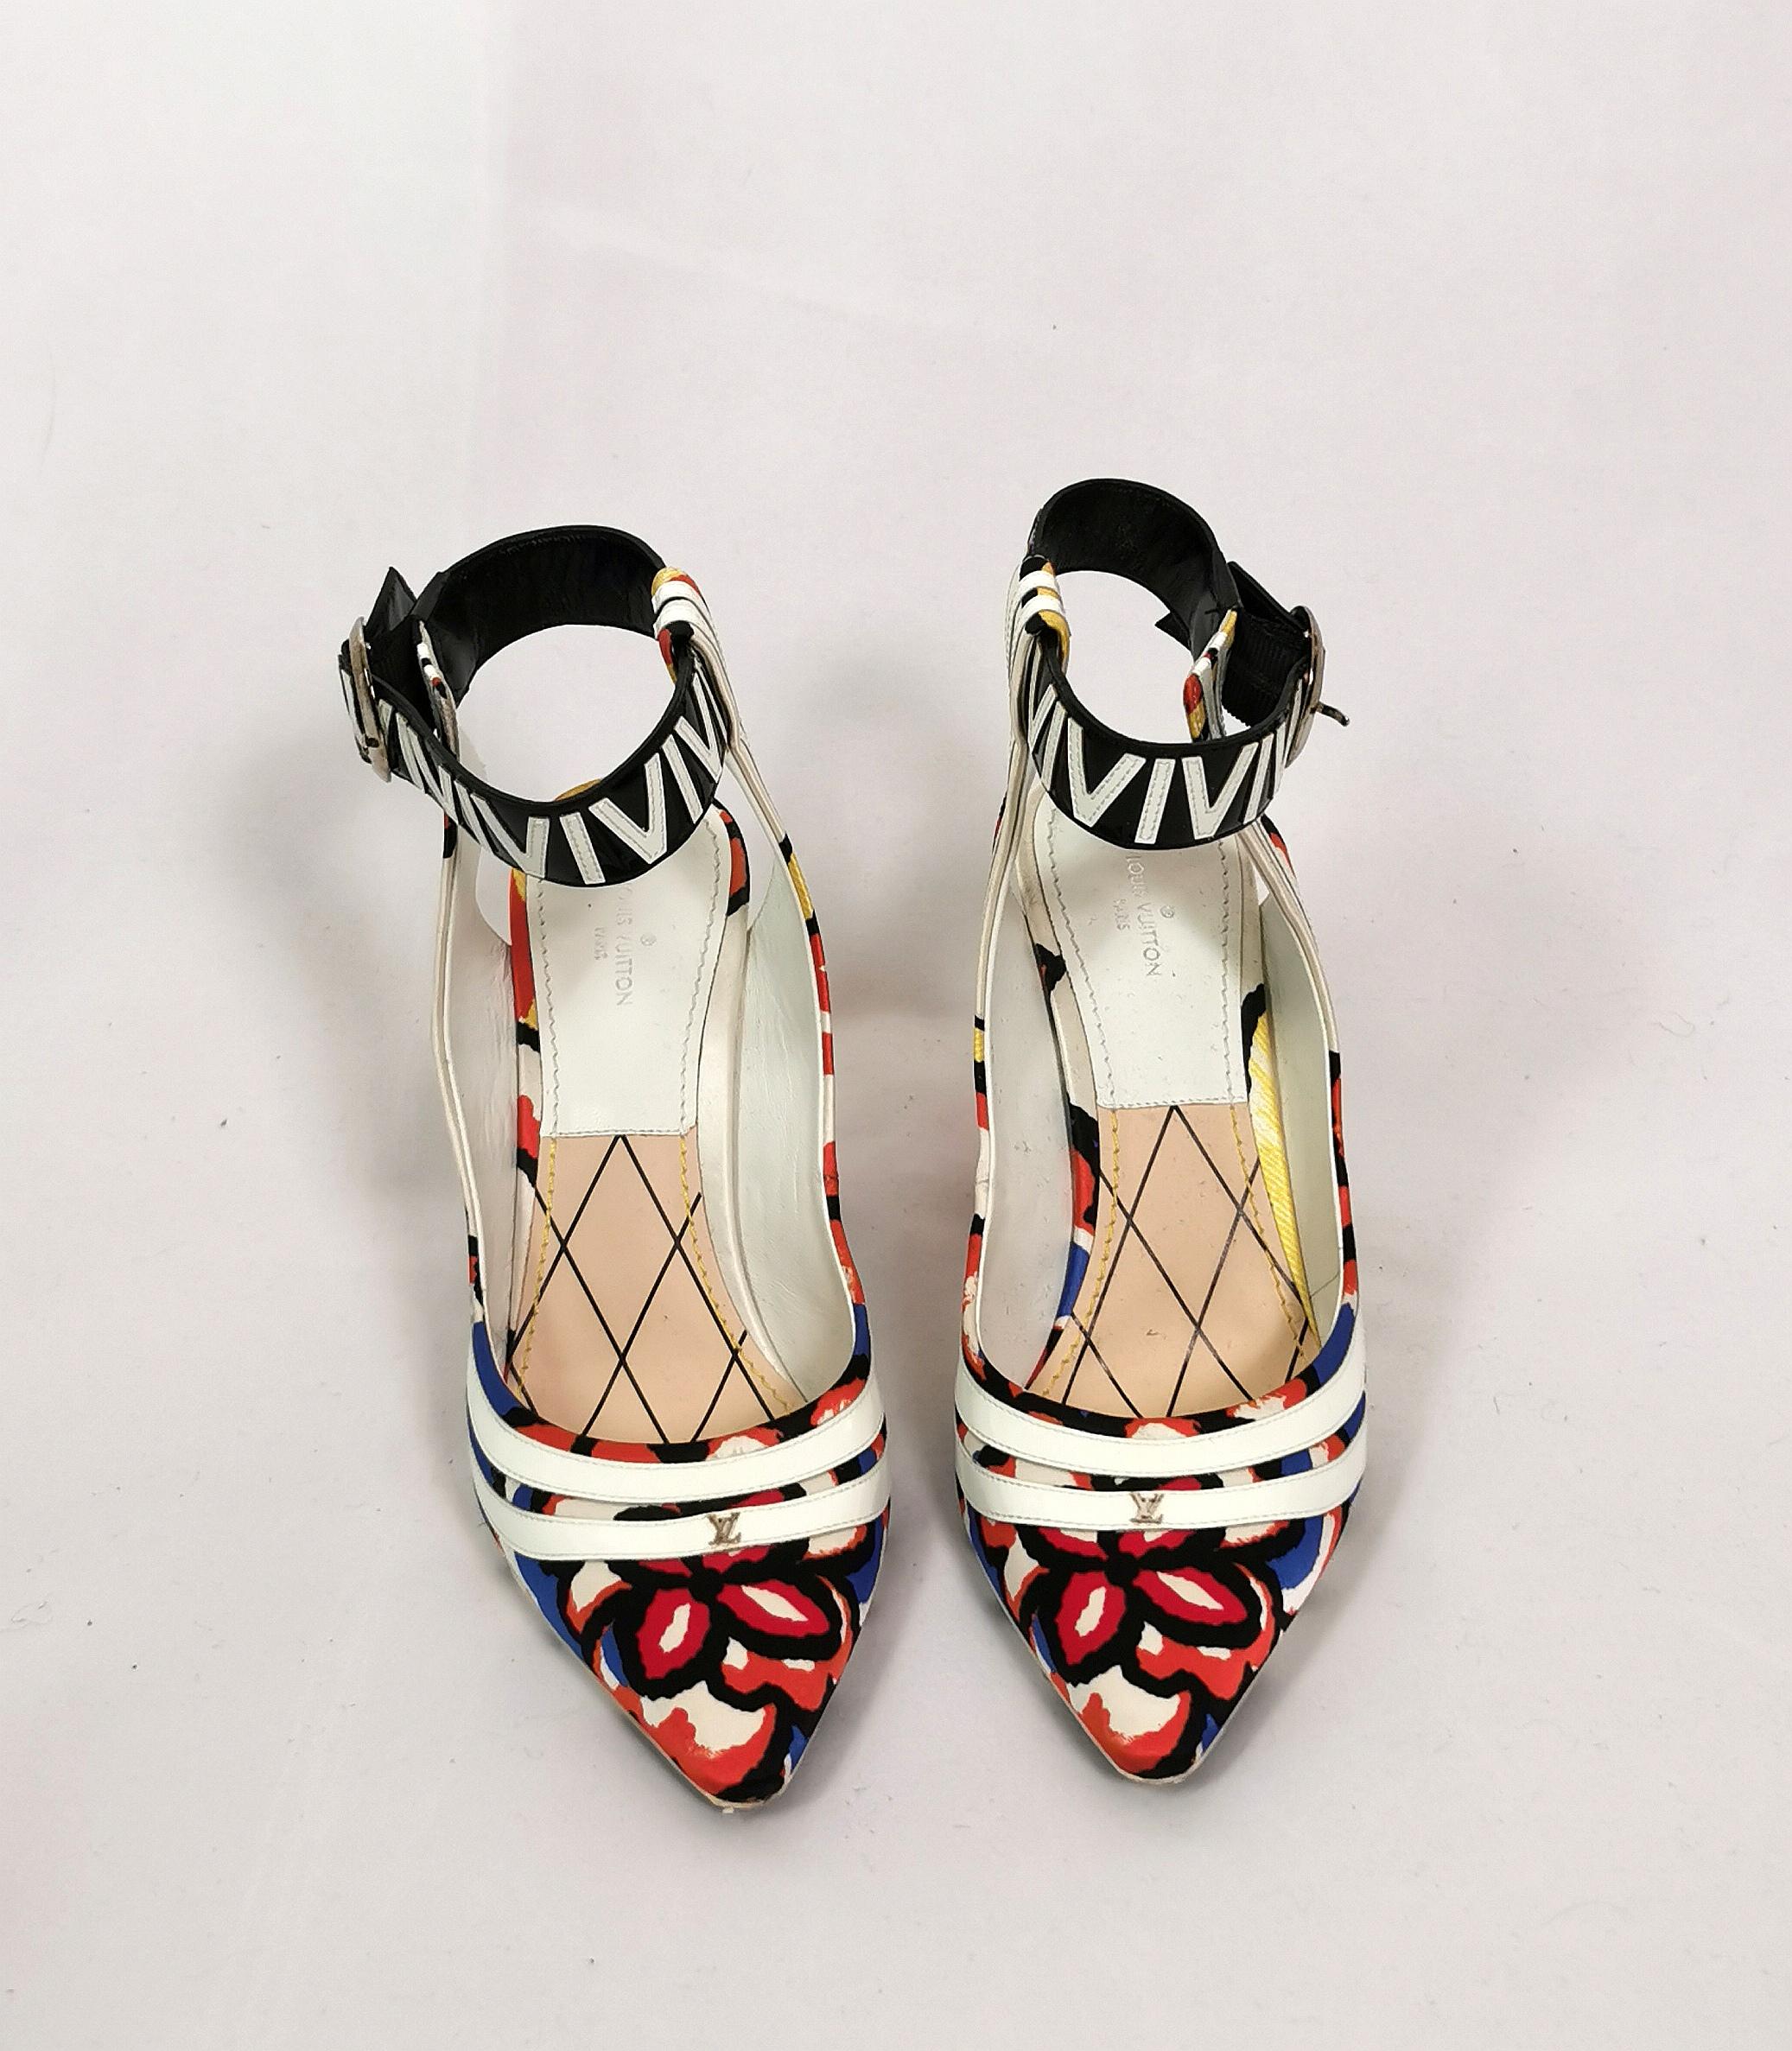 A fun and rare sold out model from Louis Vuitton's 2015 Cruise collection.

A colourful floral, graffiti style print on white canvas with chunky 70s esque block heels and a wide, patent monochrome ankle strap.

Pointed toe with the LV logo in silver